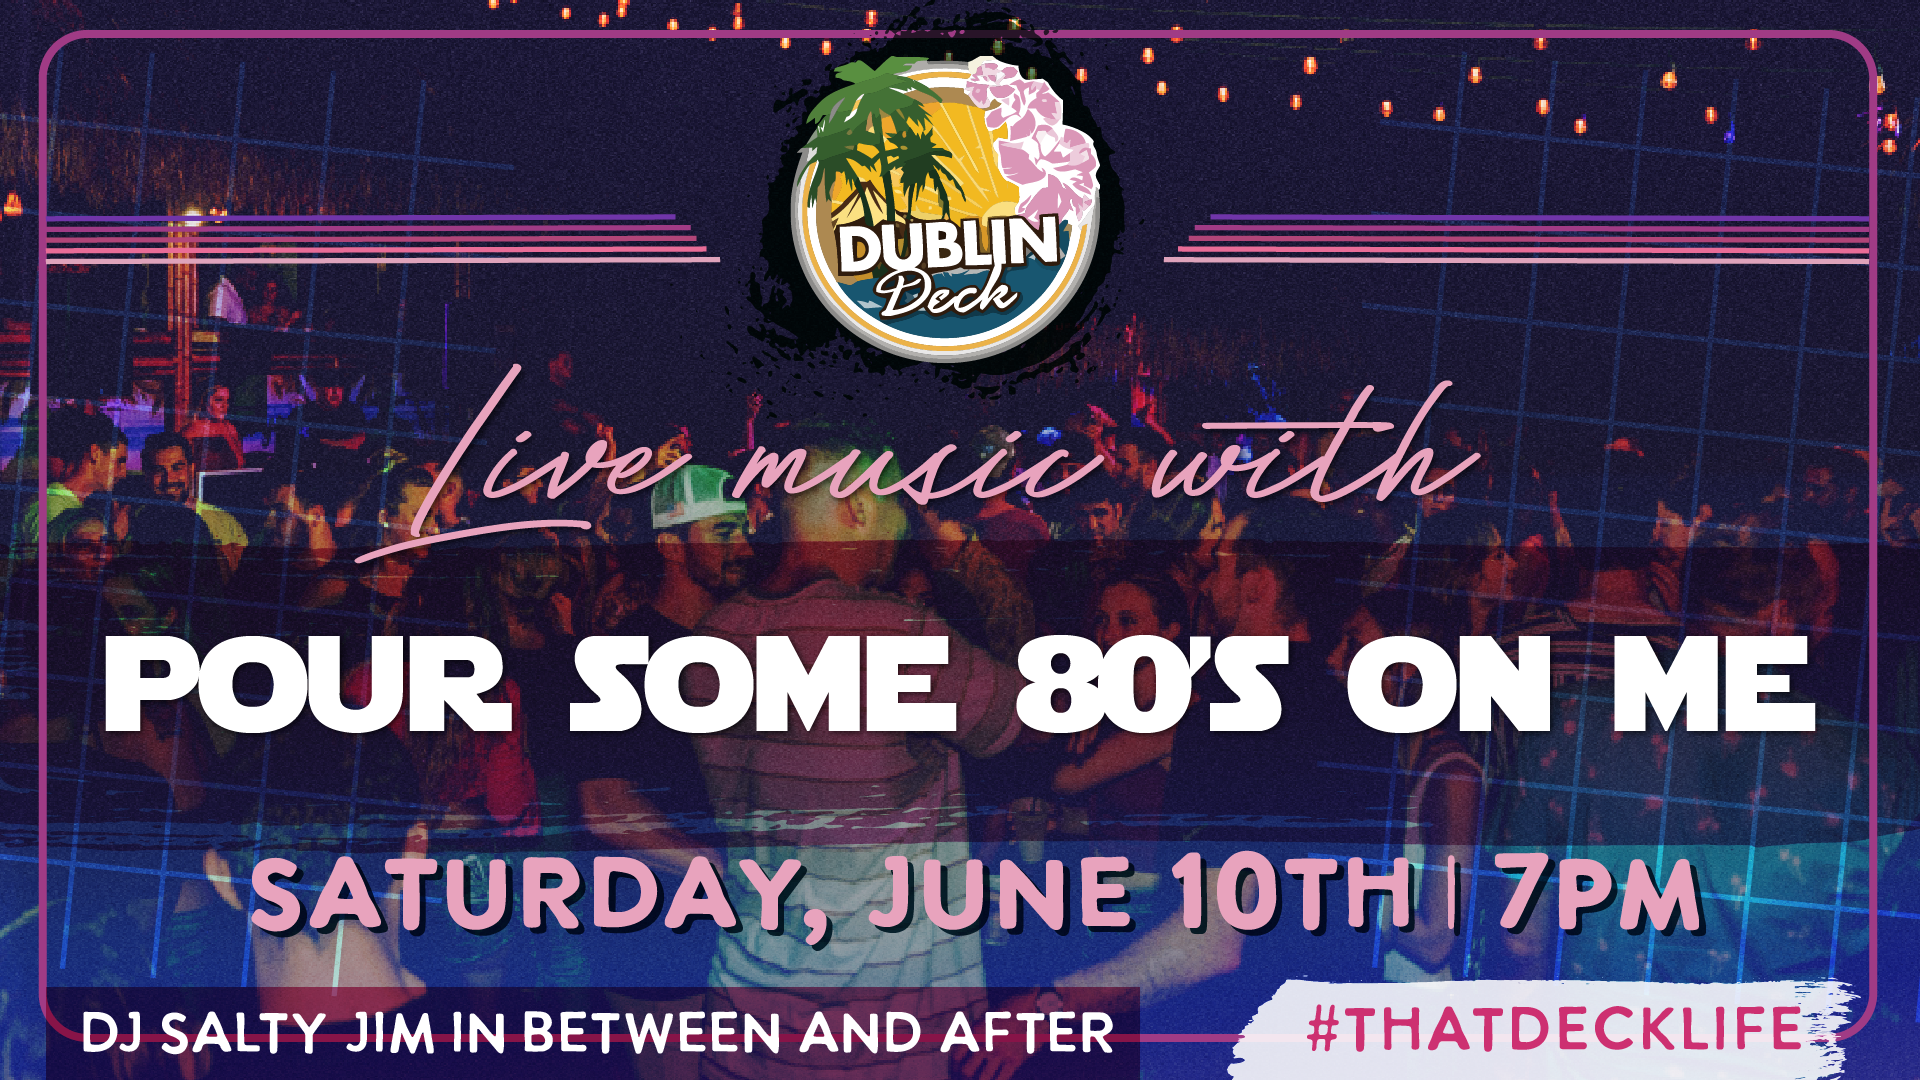 It's an 80's party at Dublin Deck with Pour Some 80's On Me! Music begins at 7PM